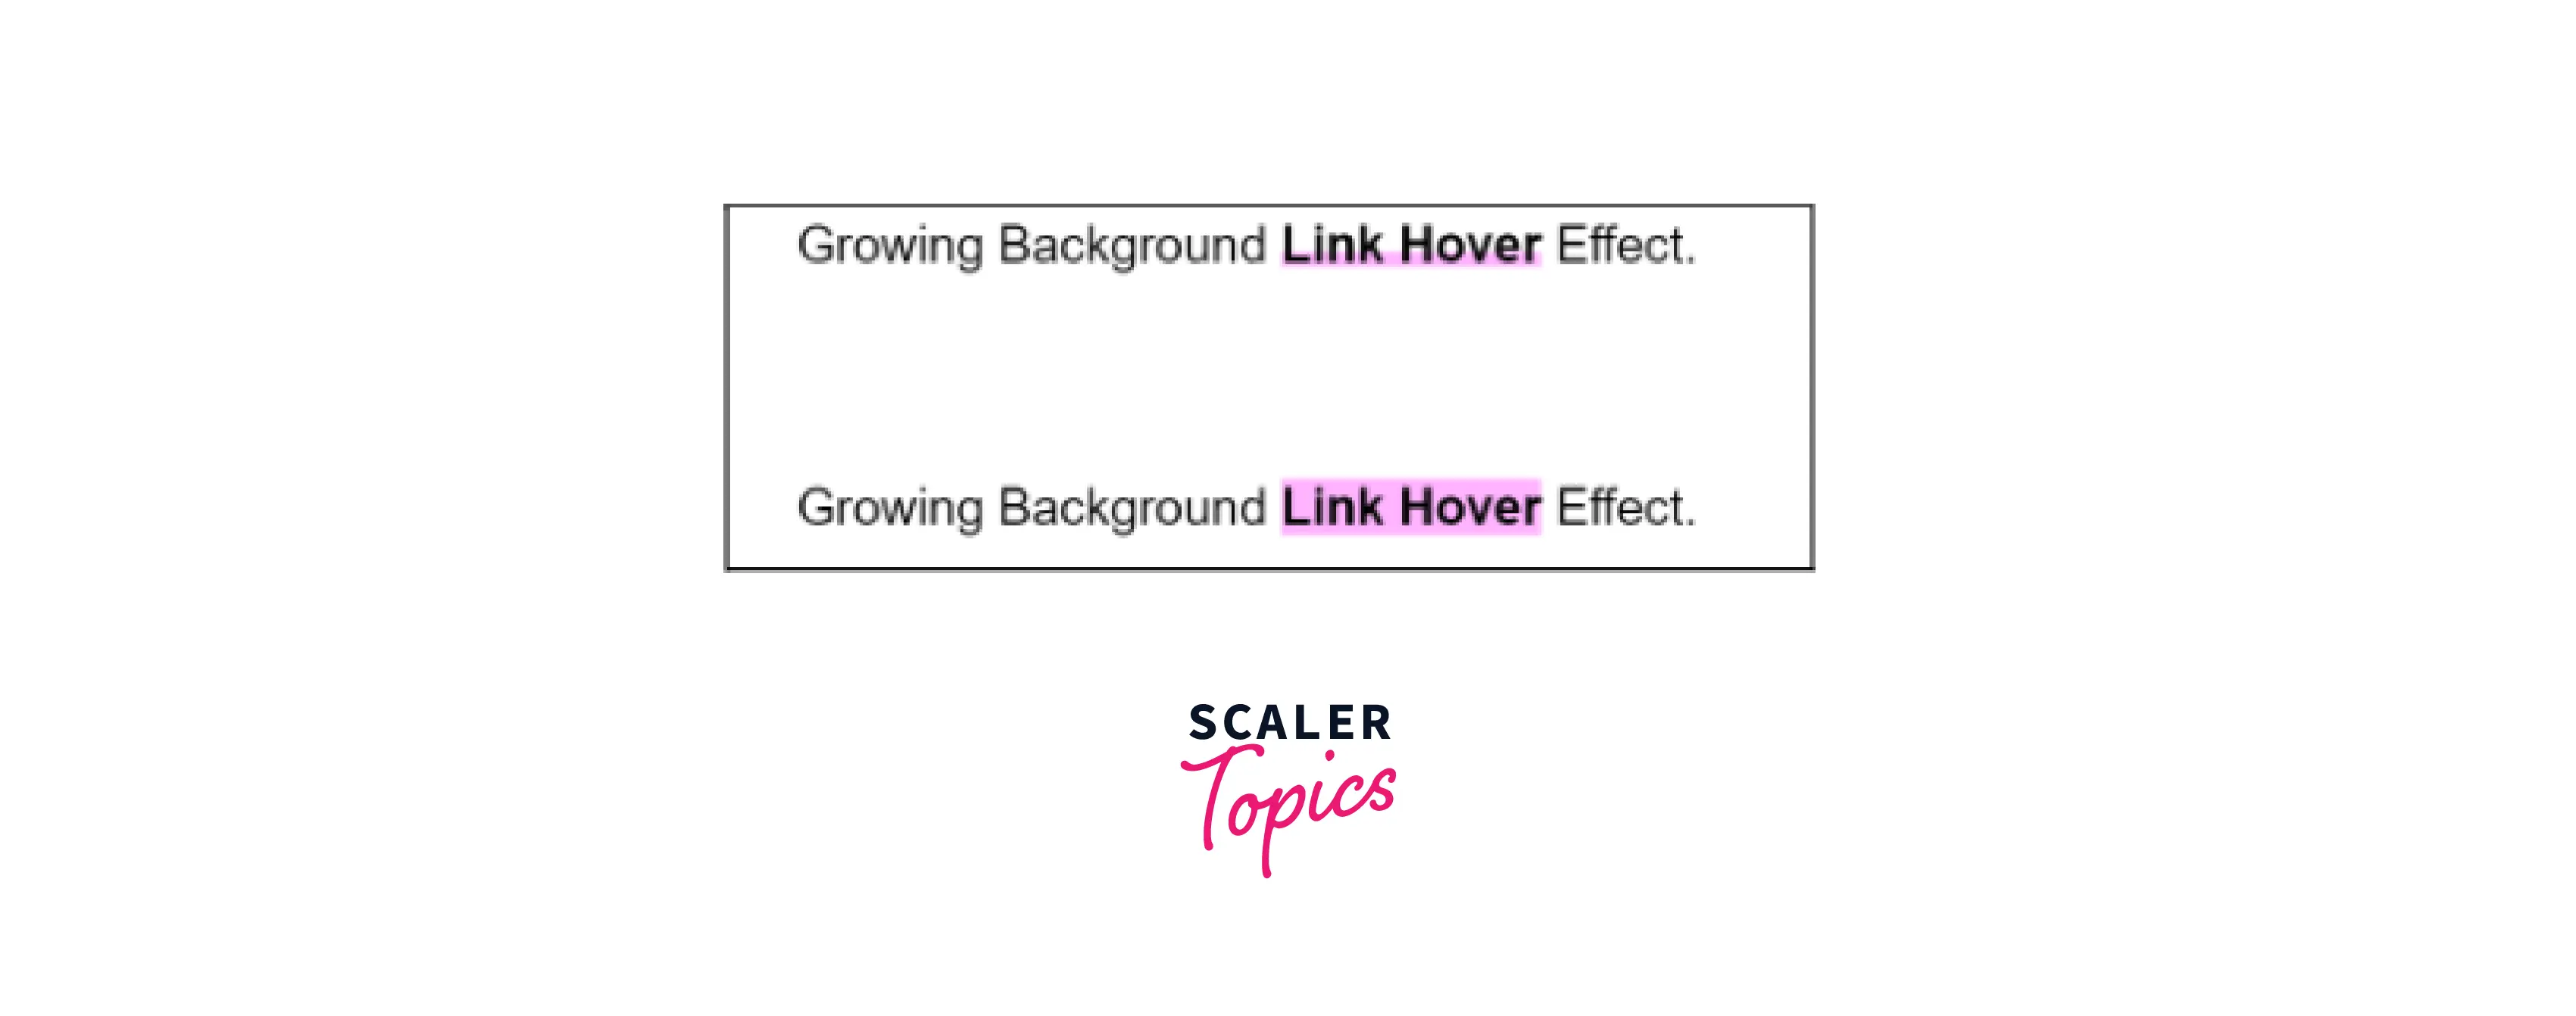 Growing Background Link Hover Effect